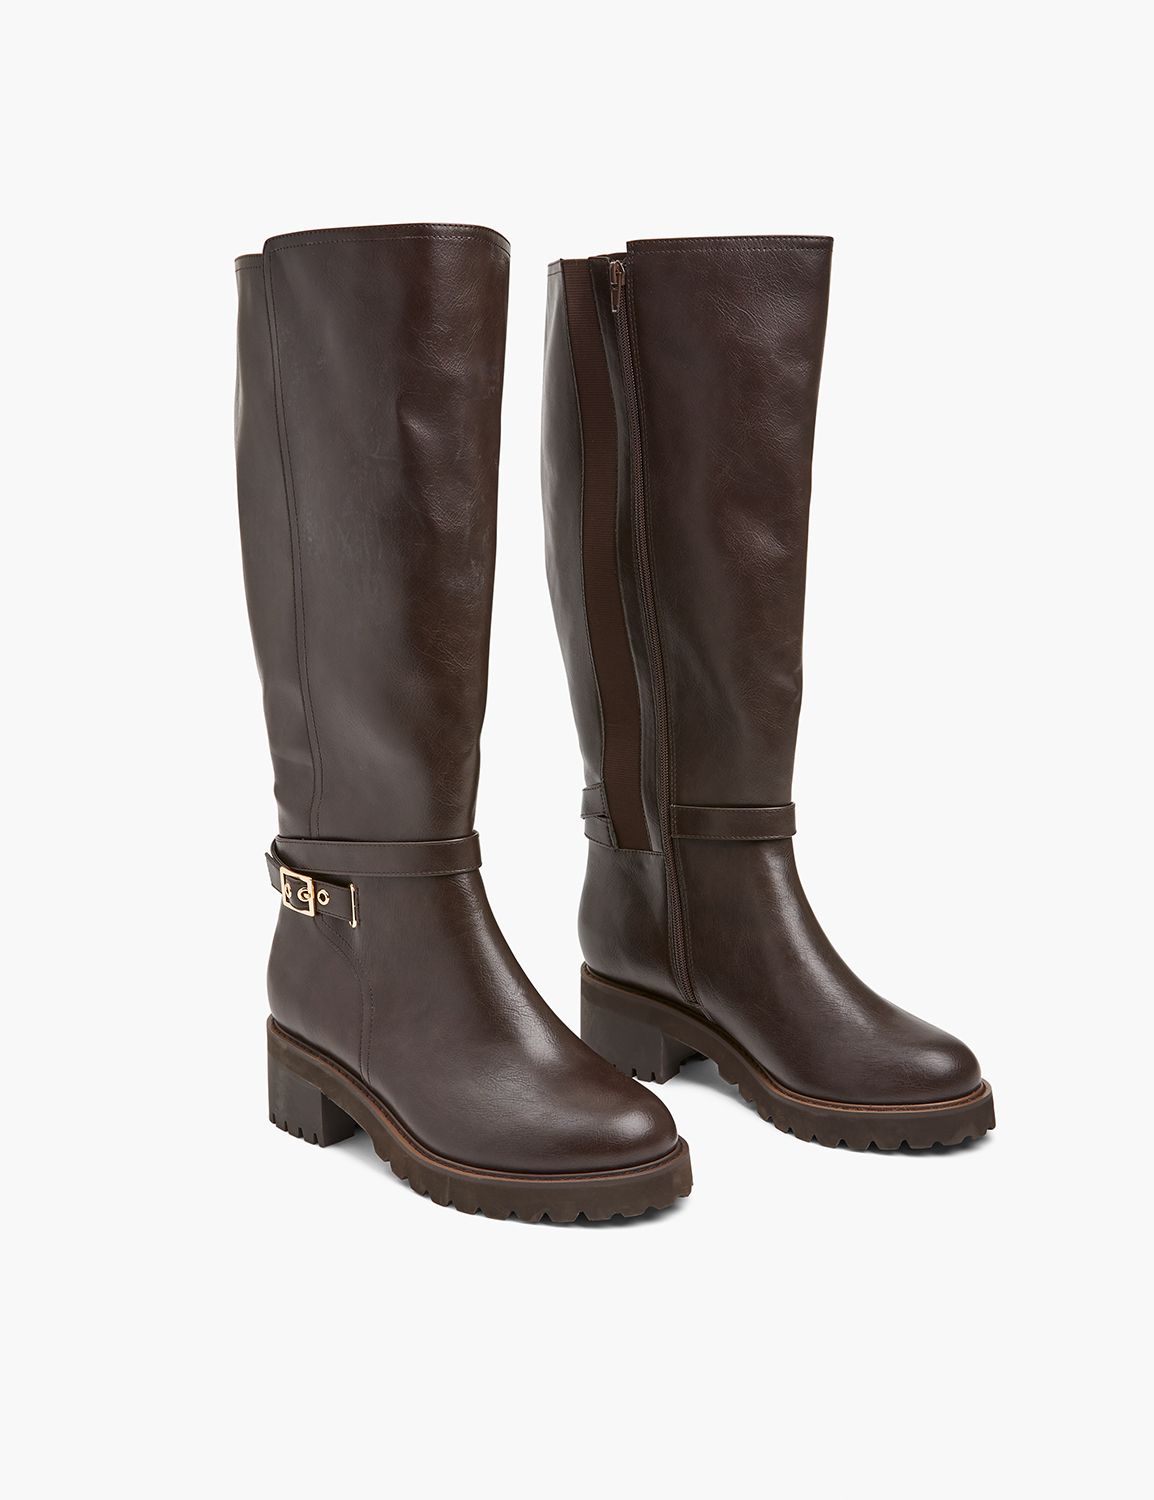 CHELSEA WITH HARDWARE TALL BOOT | LaneBryant